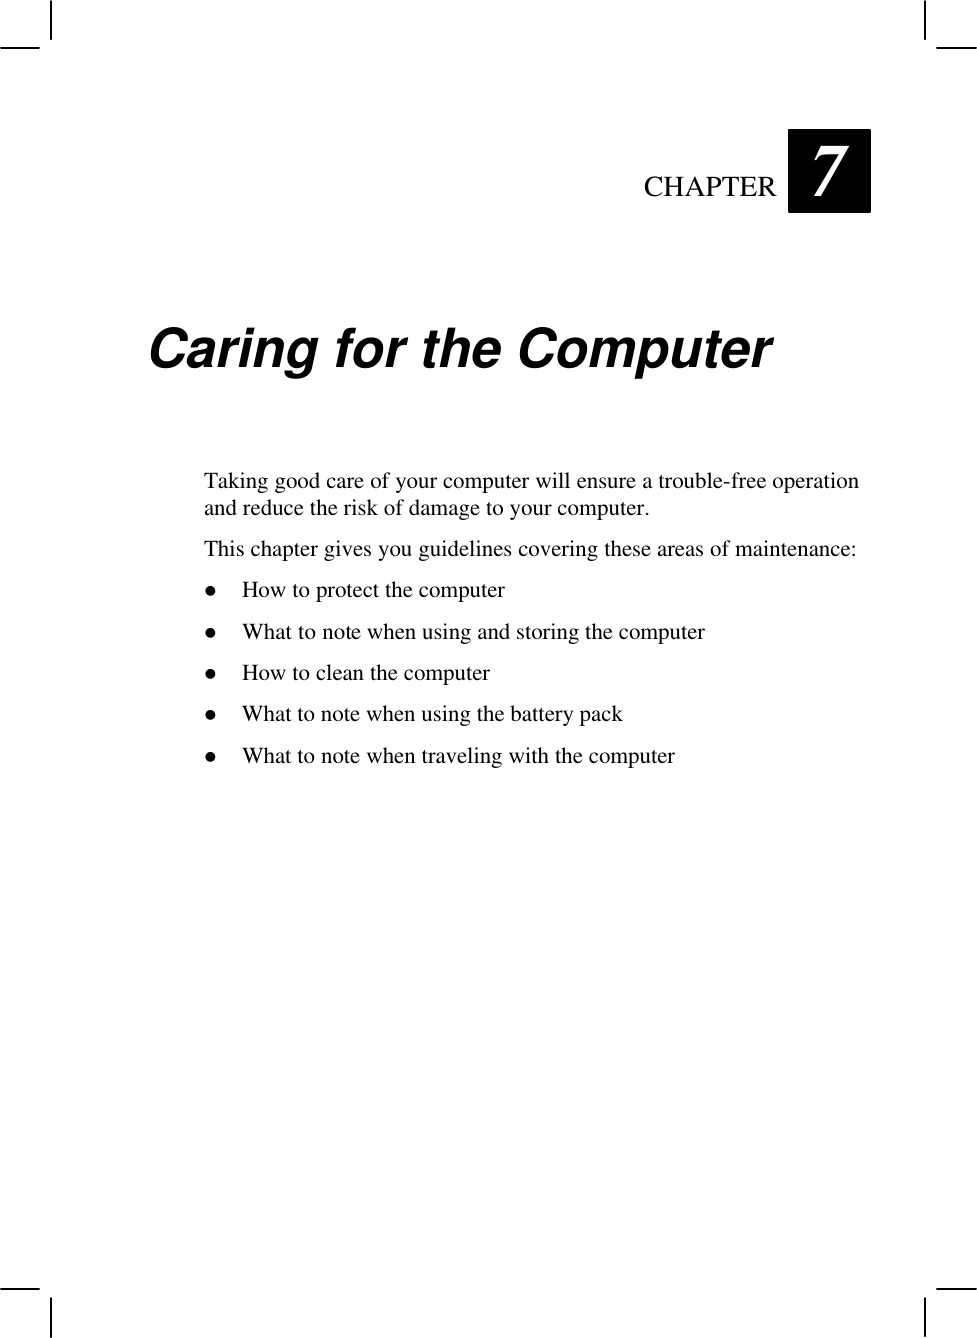   CHAPTER 7 Caring for the Computer Taking good care of your computer will ensure a trouble-free operation and reduce the risk of damage to your computer. This chapter gives you guidelines covering these areas of maintenance: l How to protect the computer l What to note when using and storing the computer l How to clean the computer l What to note when using the battery pack l What to note when traveling with the computer 